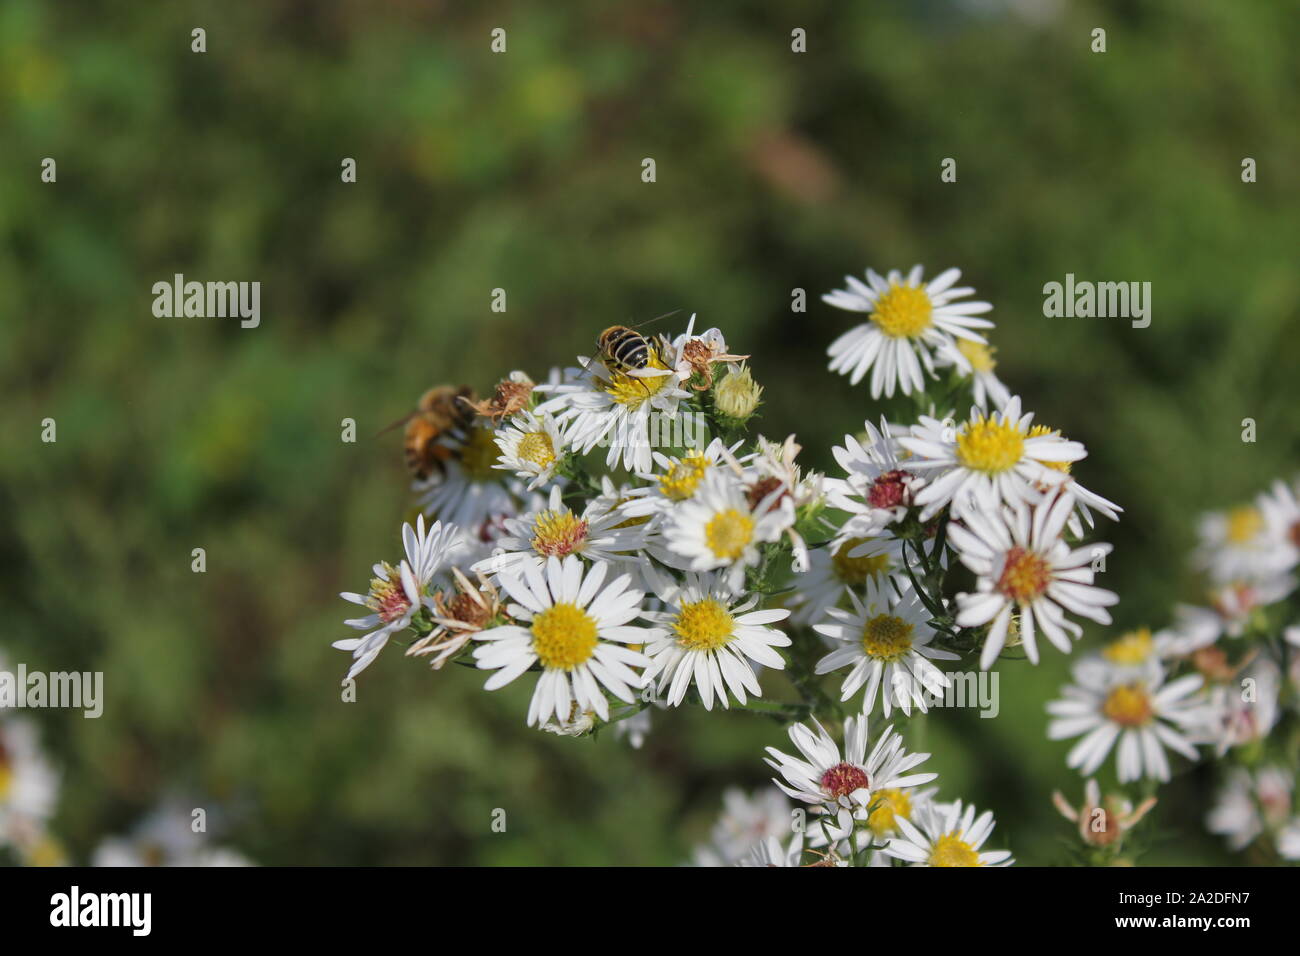 Two honey bees pollinating white daisy flowers. Stock Photo